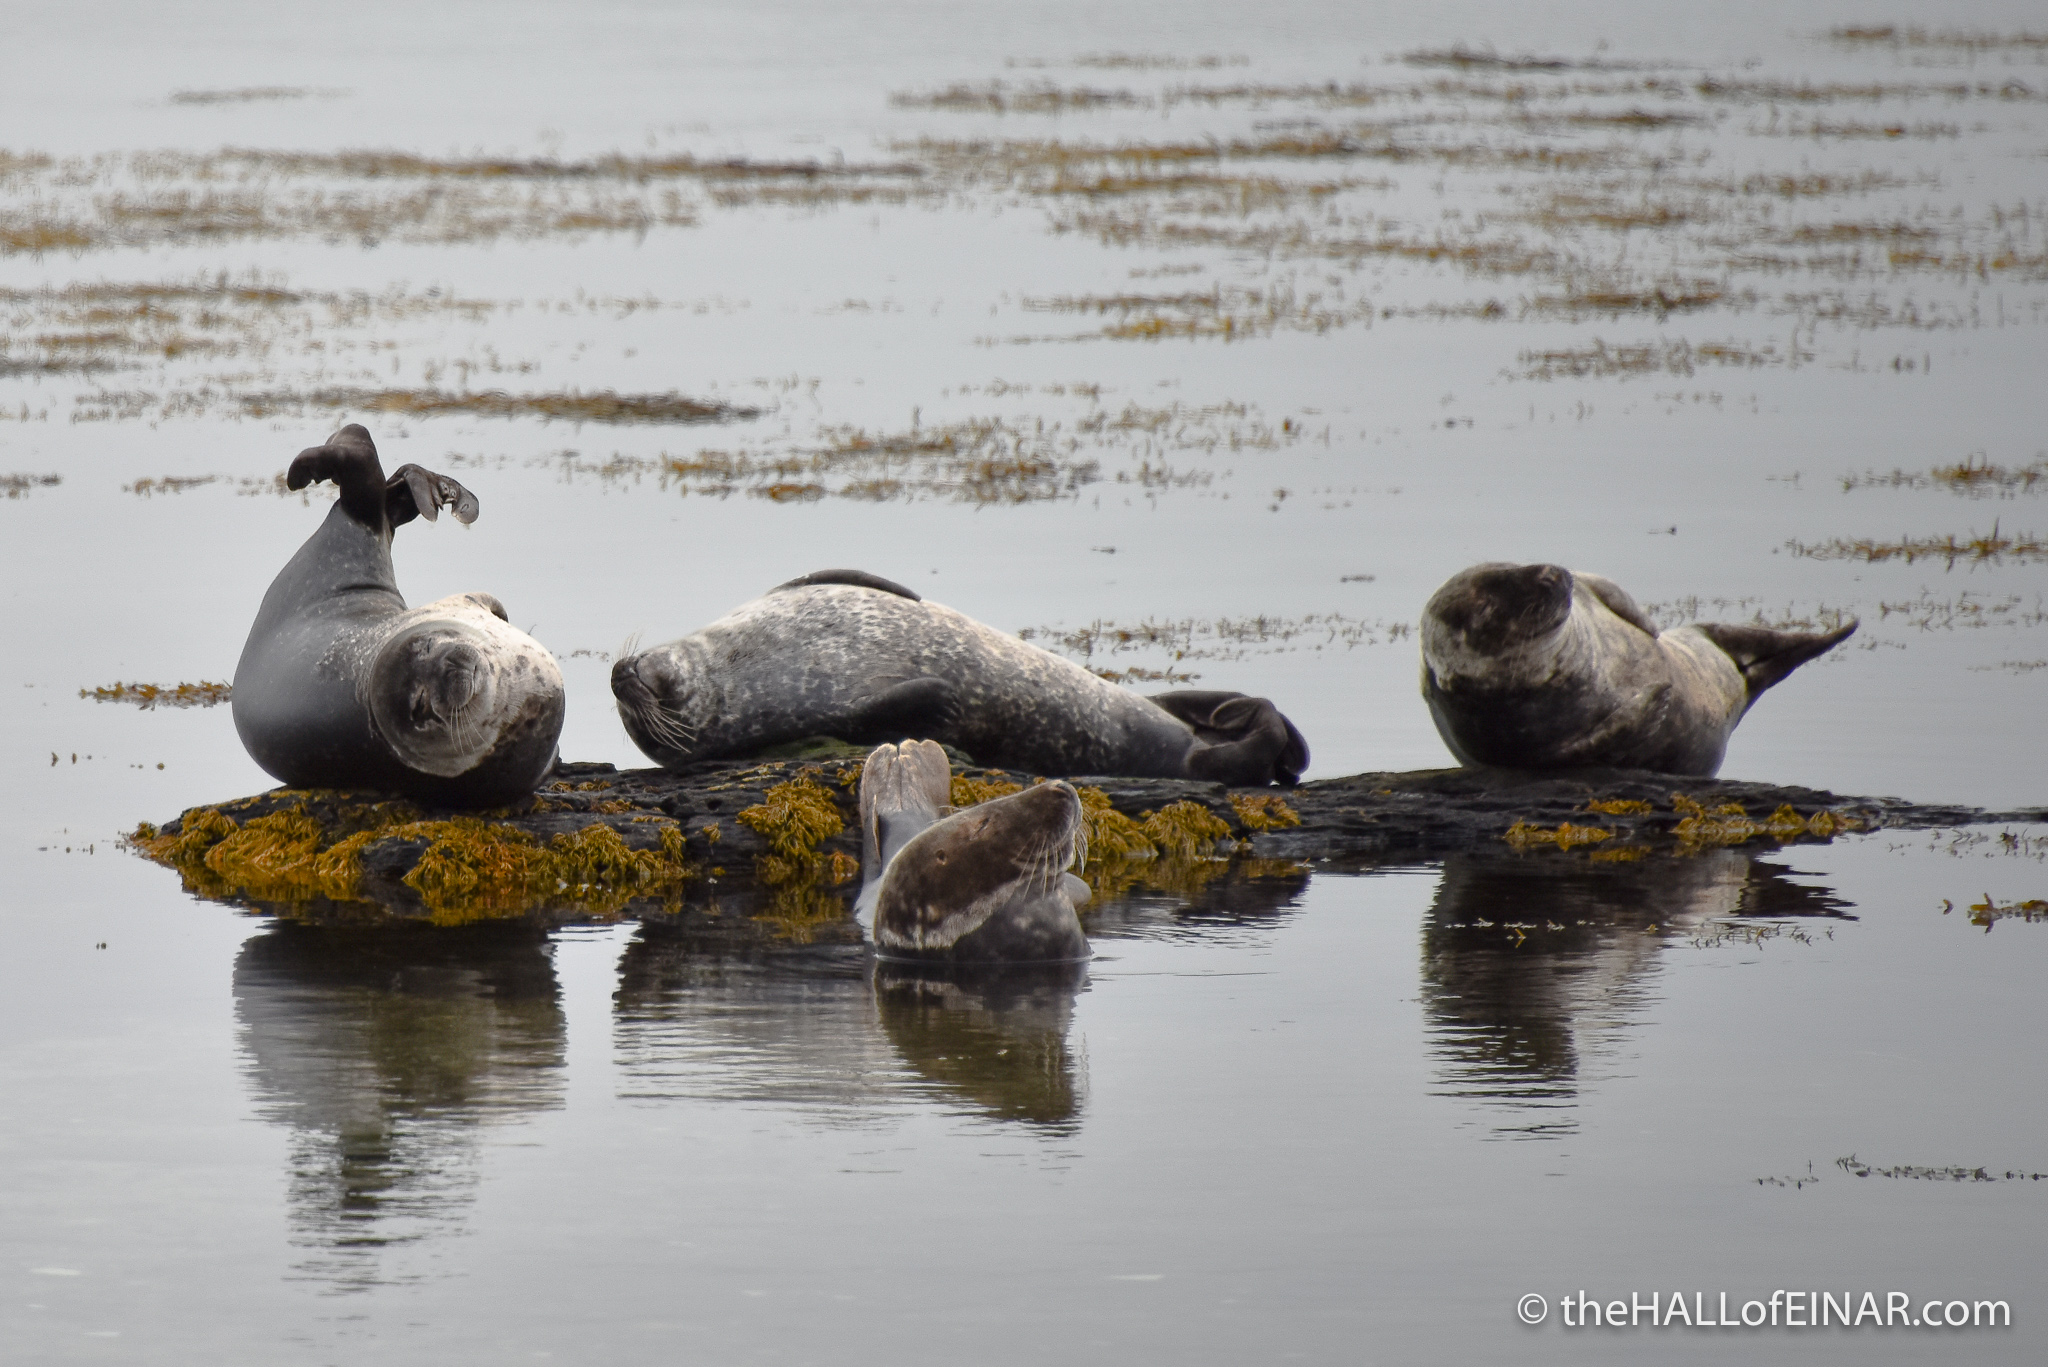 Common Seals - me after dinner - The Hall of Einar - photograph (c) 2016 David Bailey (not the)